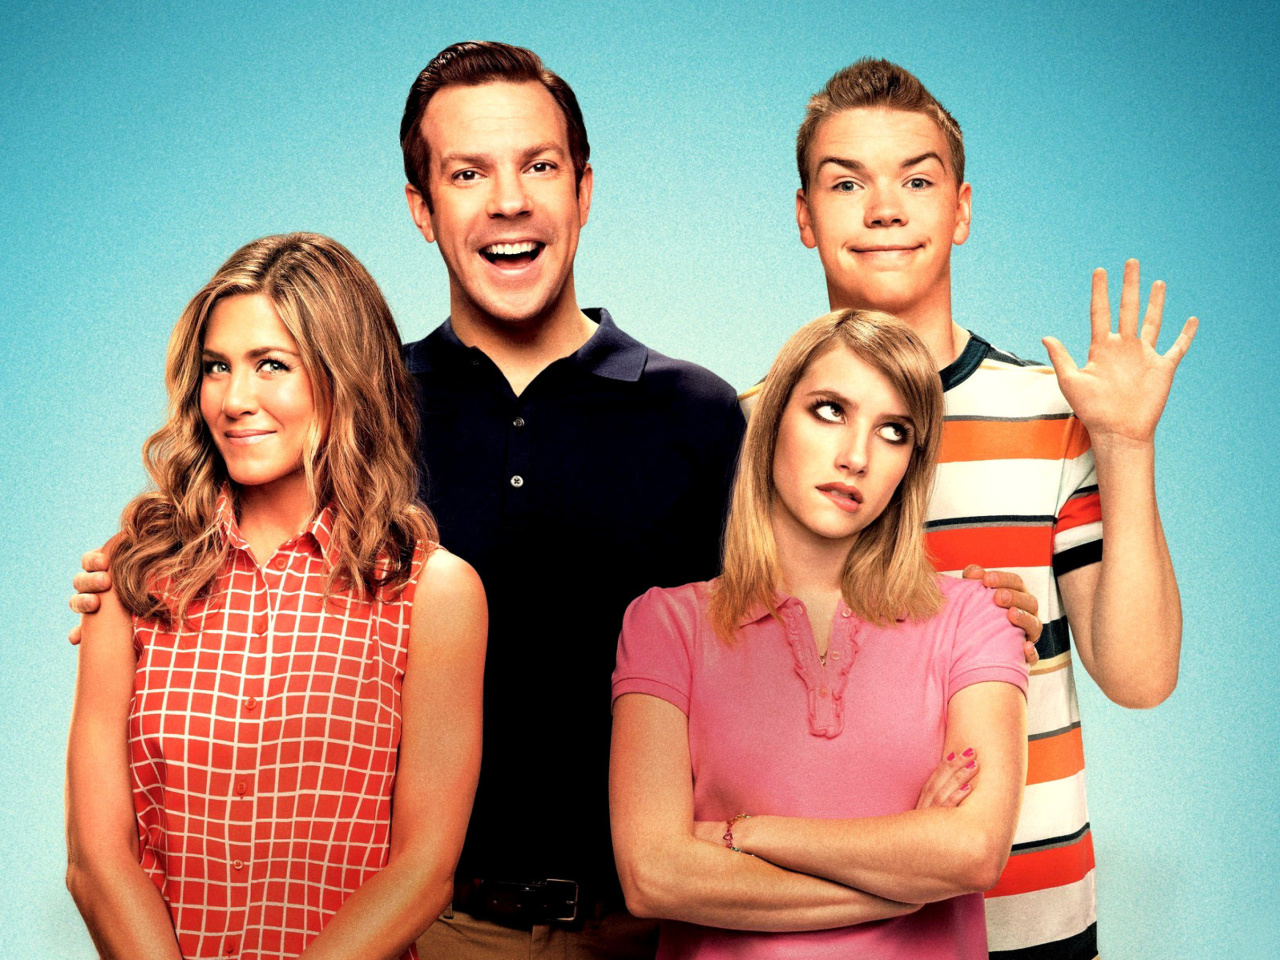 We are the Millers screenshot #1 1280x960